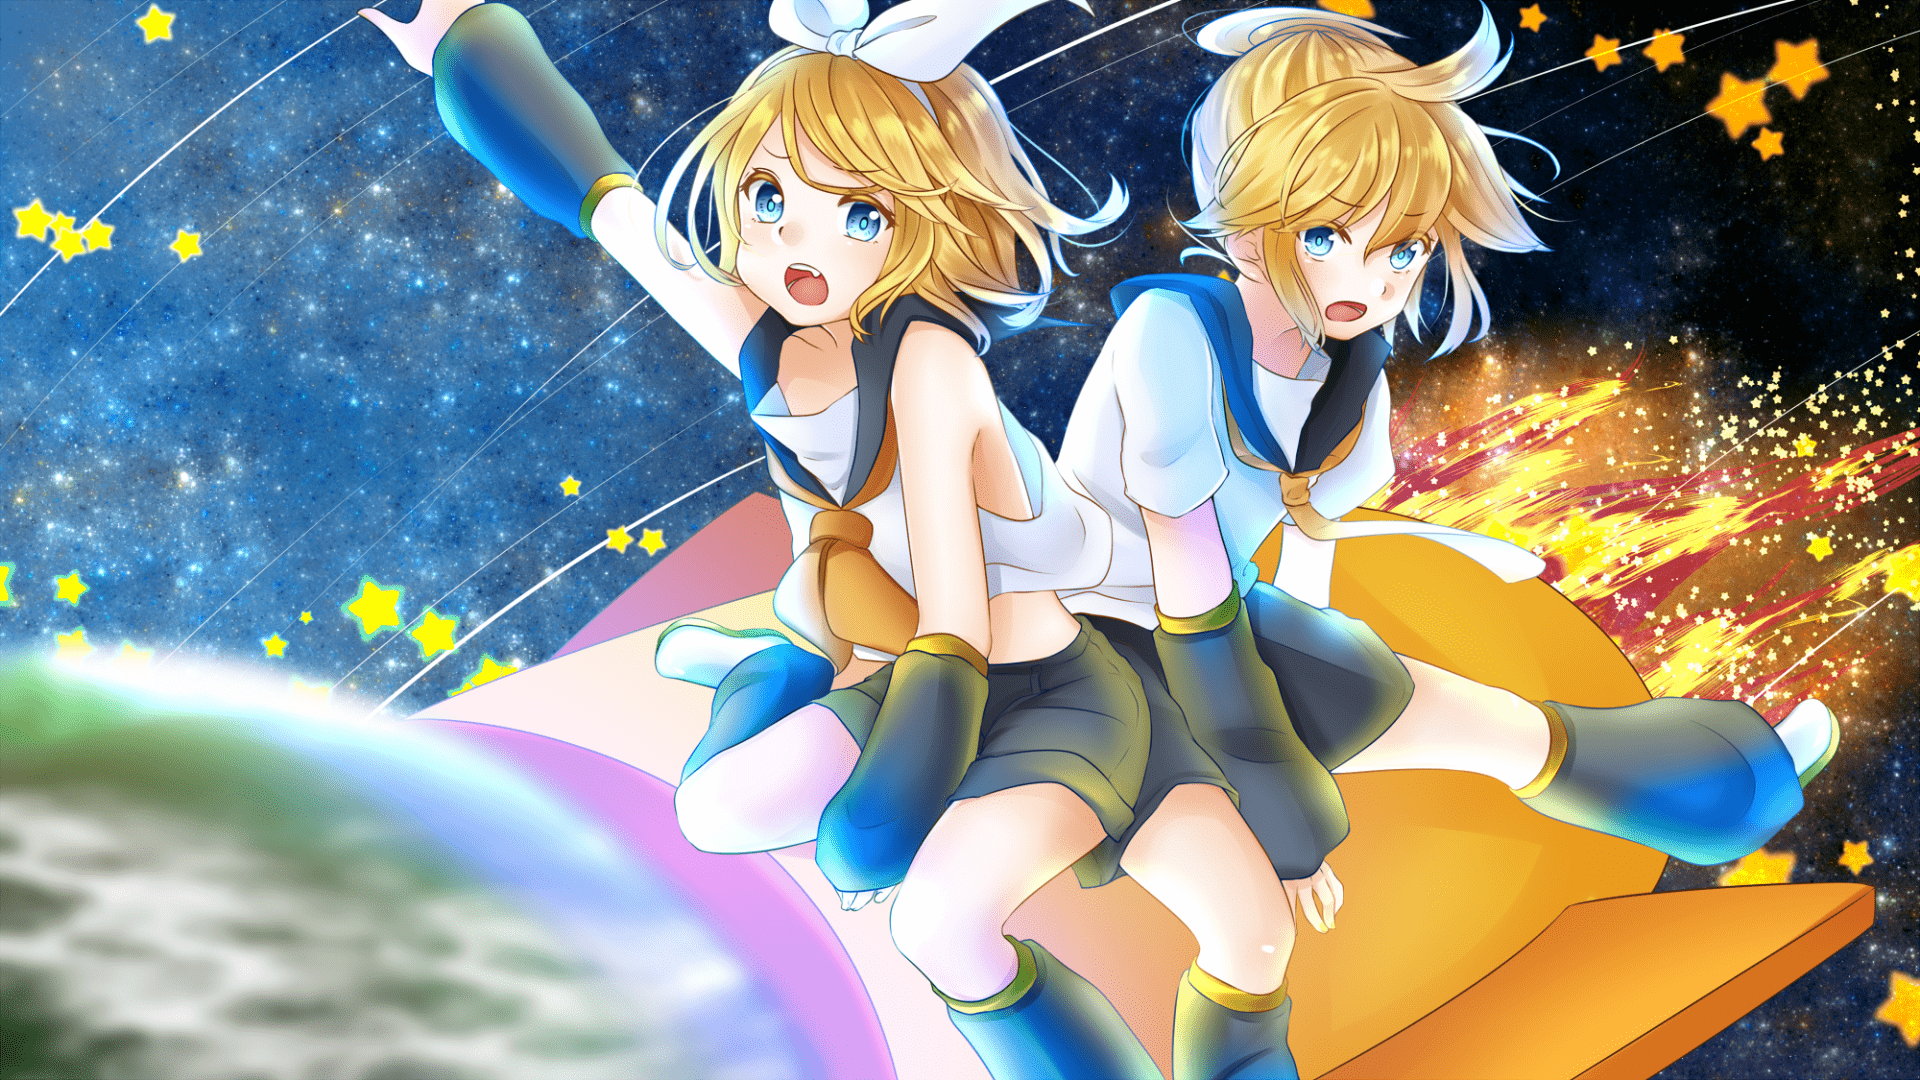 Kagamine Rin and Len are twin vocaloids from Japan. They are riding a rocket ship through space. - 